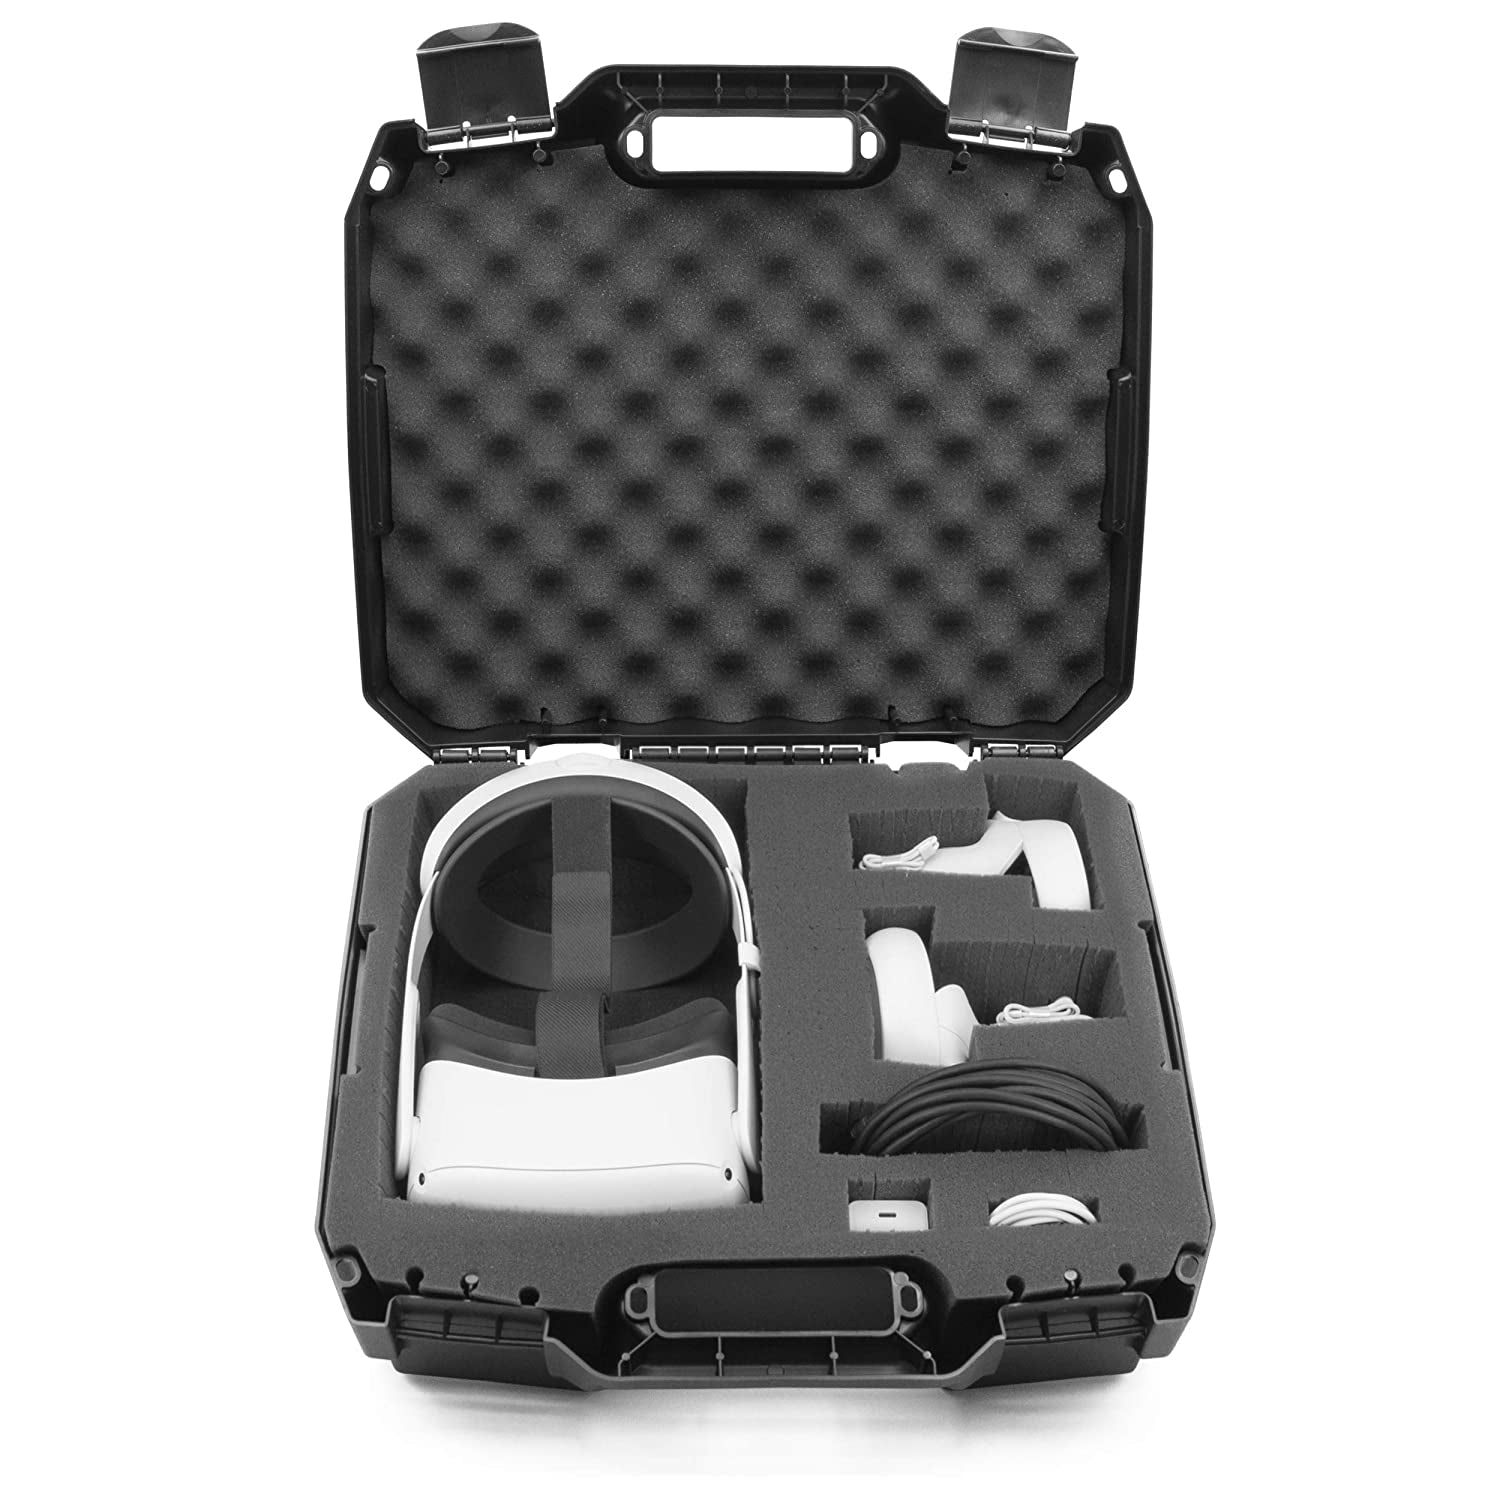 CASEMATIX Hard Case Compatible with Meta Quest 2 and Oculus Quest 2 VR Gaming Headset & Accessories - Hard Case with Customizable Foam Fits Elite Strap and Other Accessories